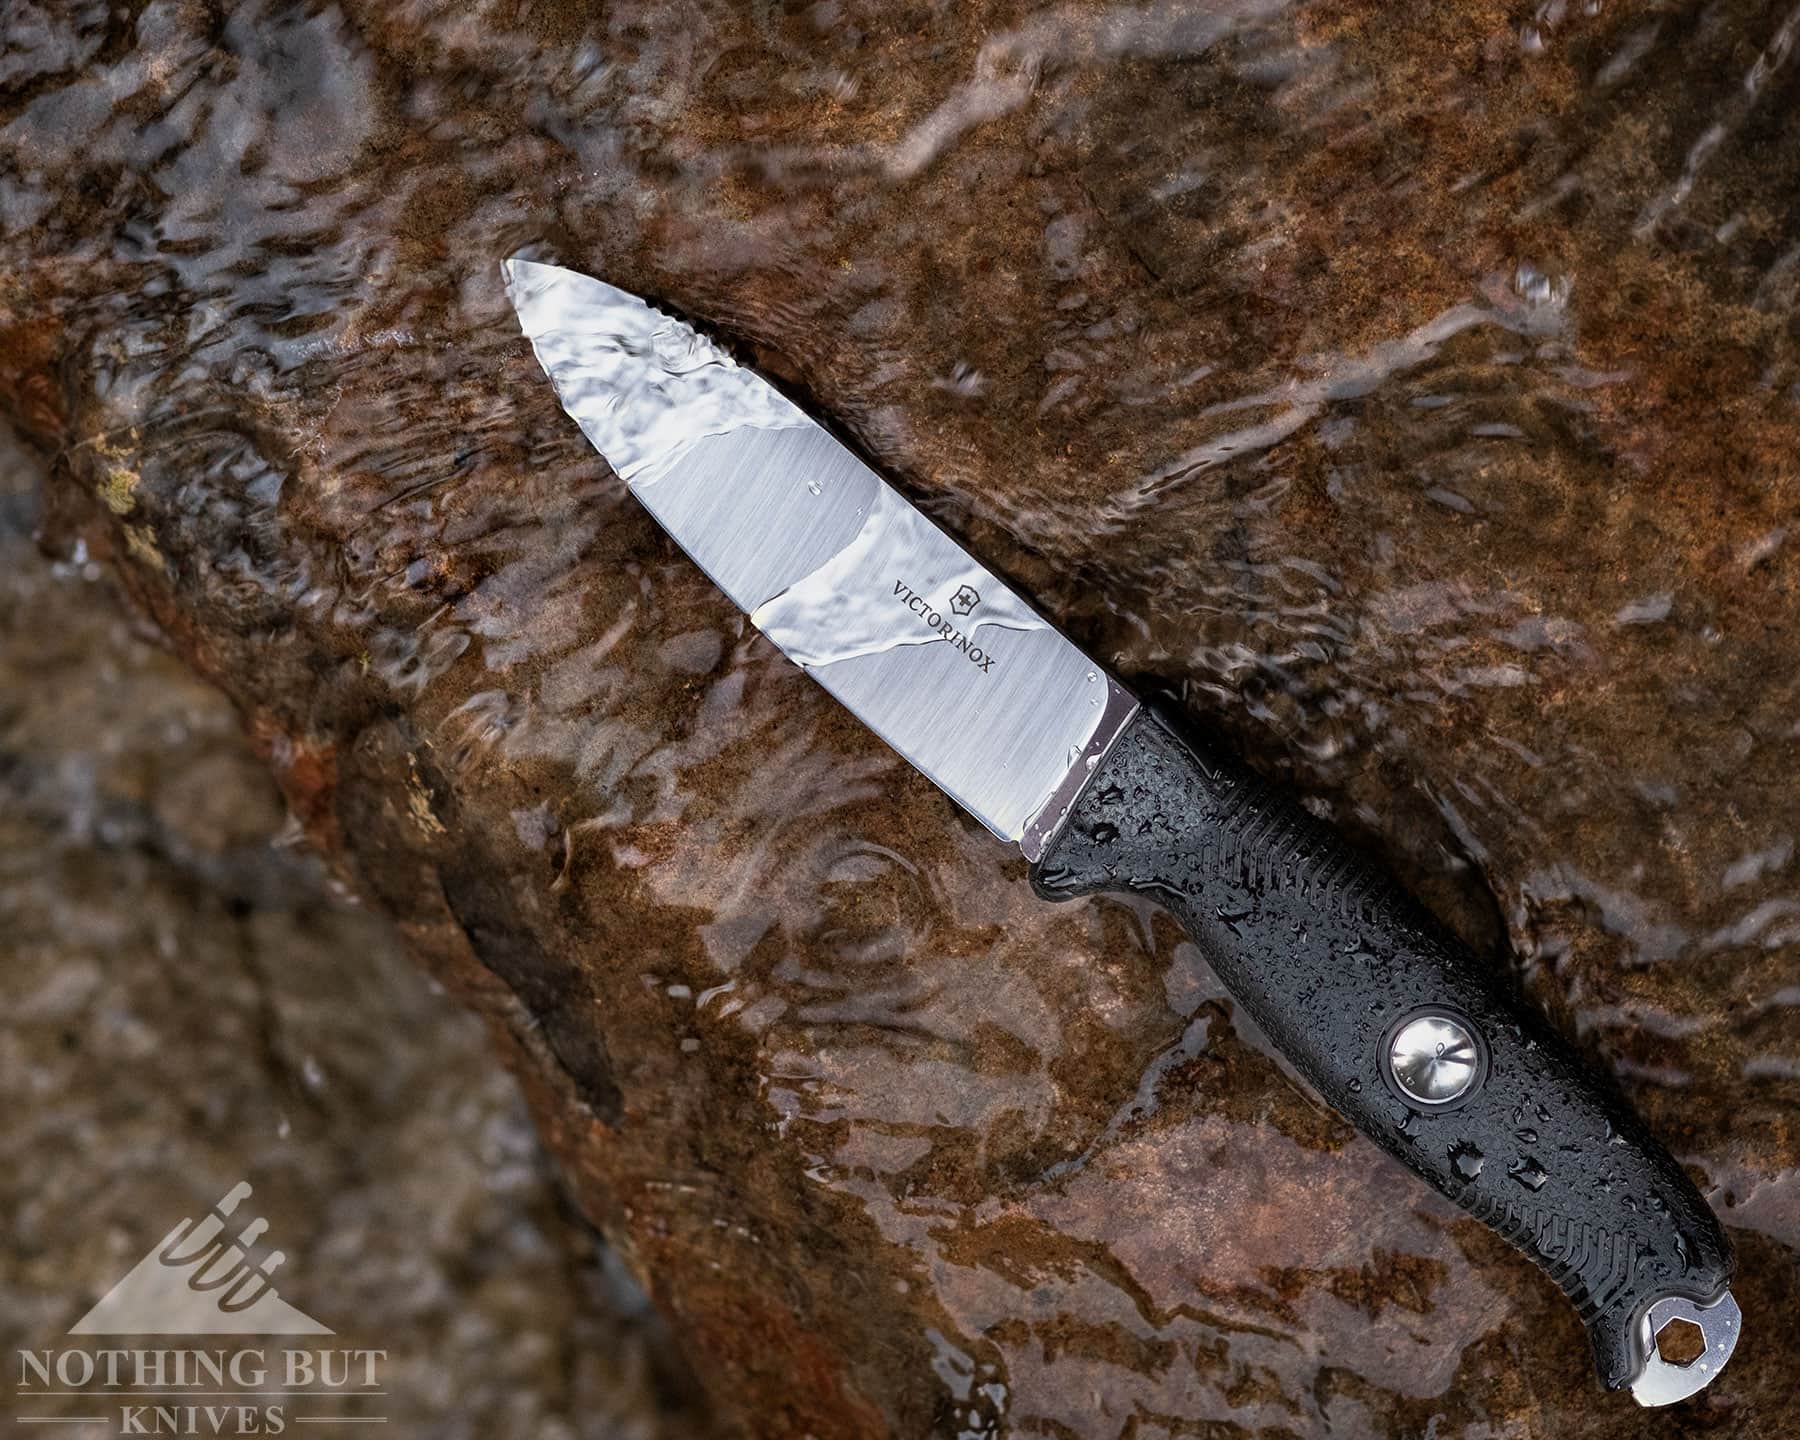 The Venture Pro holds up well in wet or humid locations thanks to its 14C28N steel blade and TPE handle. 